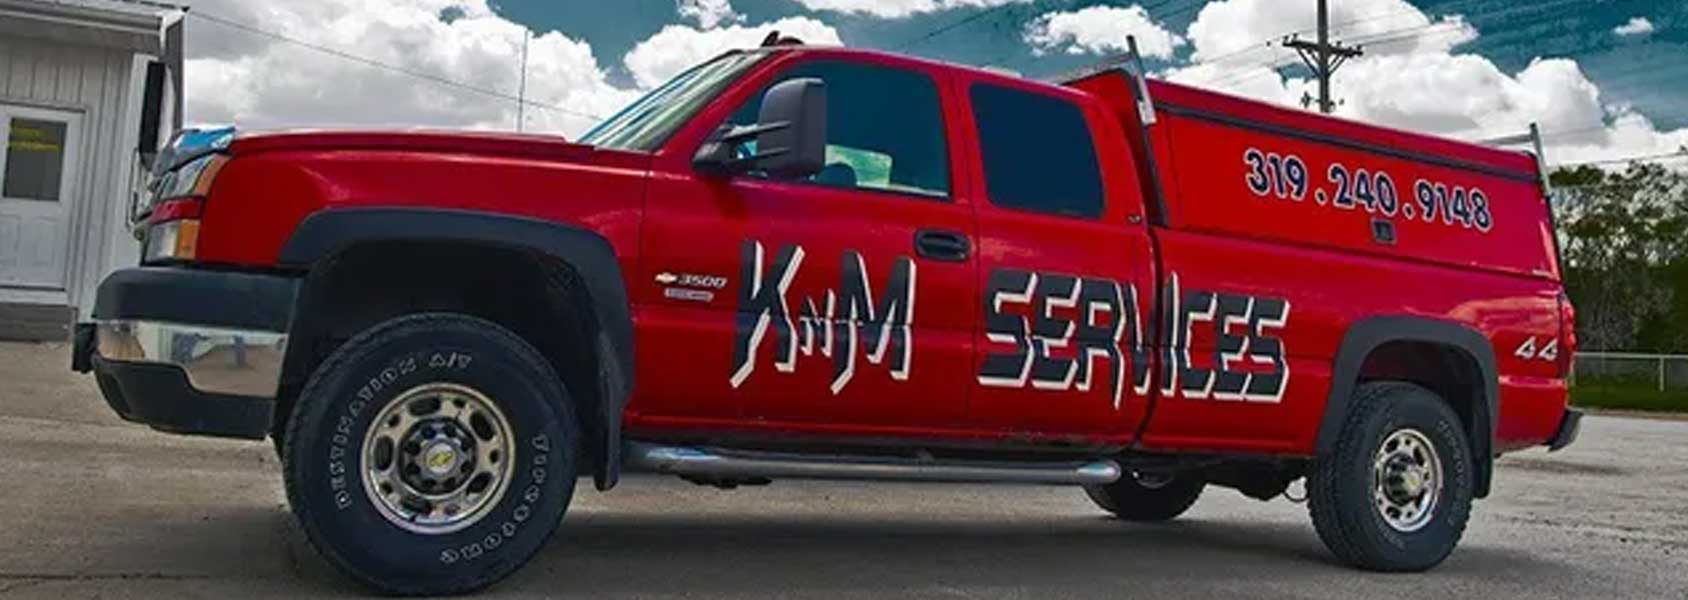 KnM Services truck